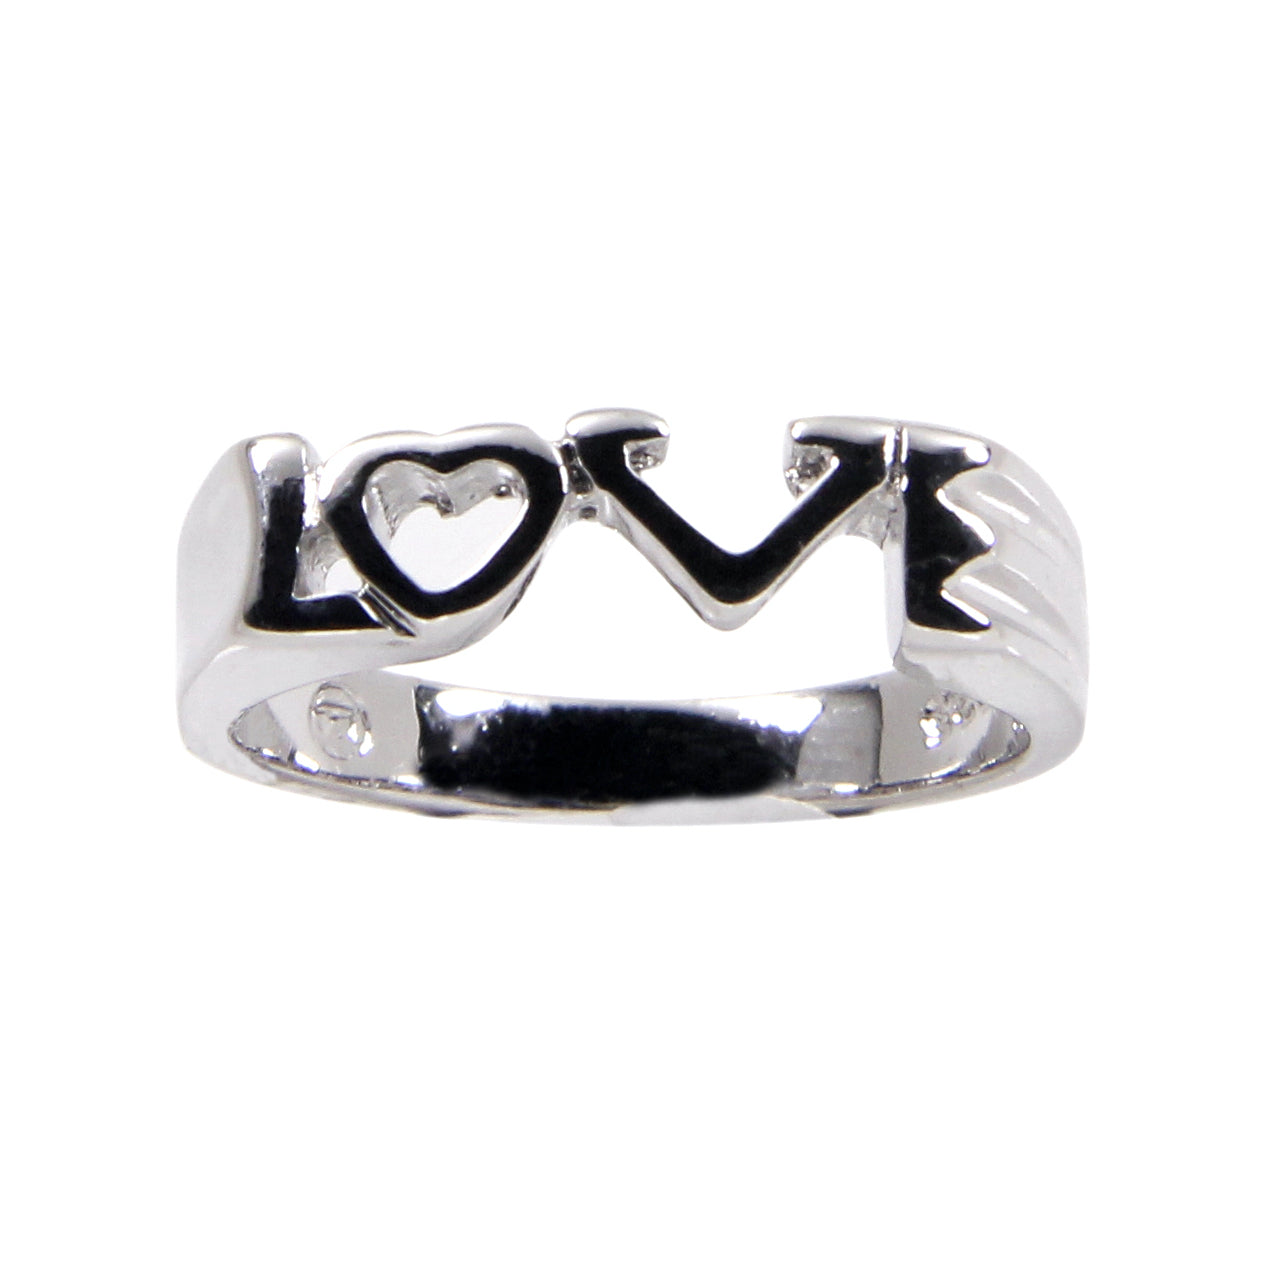 Adorable 3 mm Sterling Silver Connected L-Word Ring